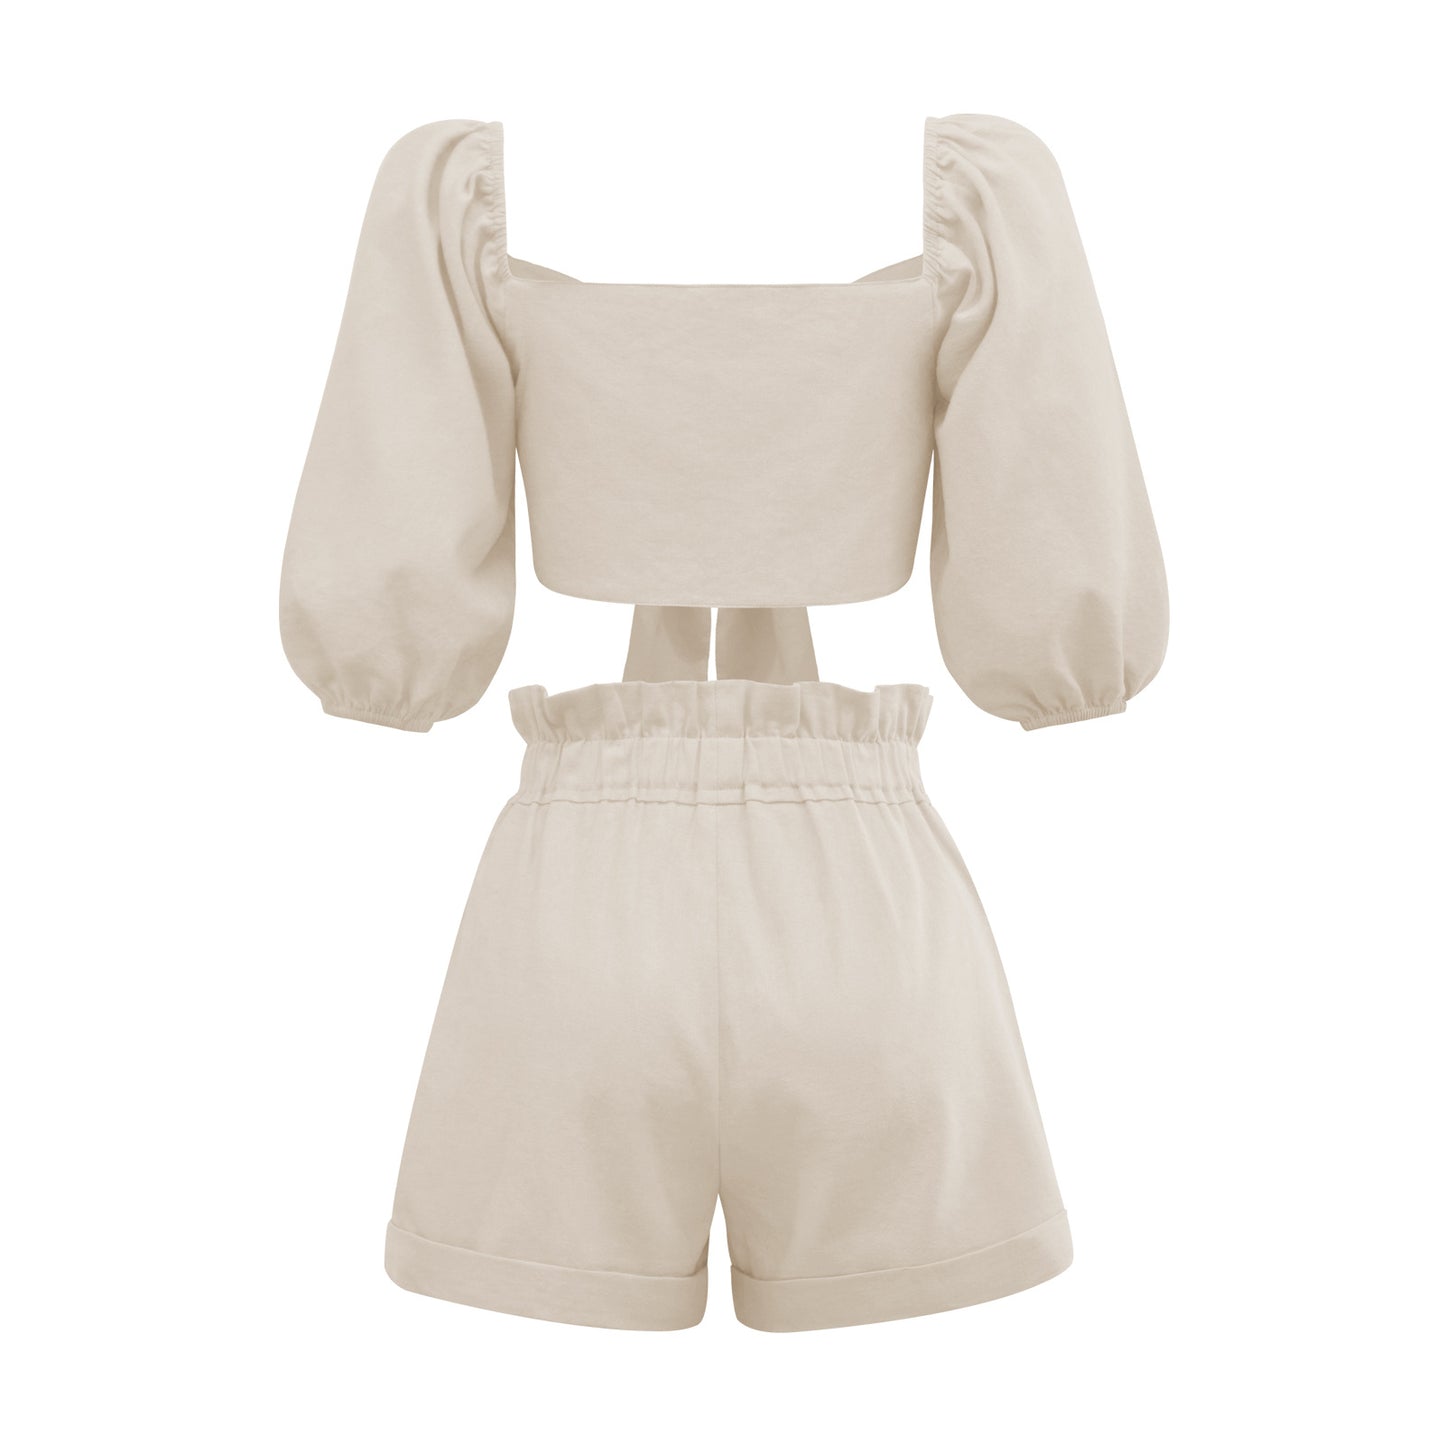 Casual Short Midriff Baring Tops and Shorts Sets for Women